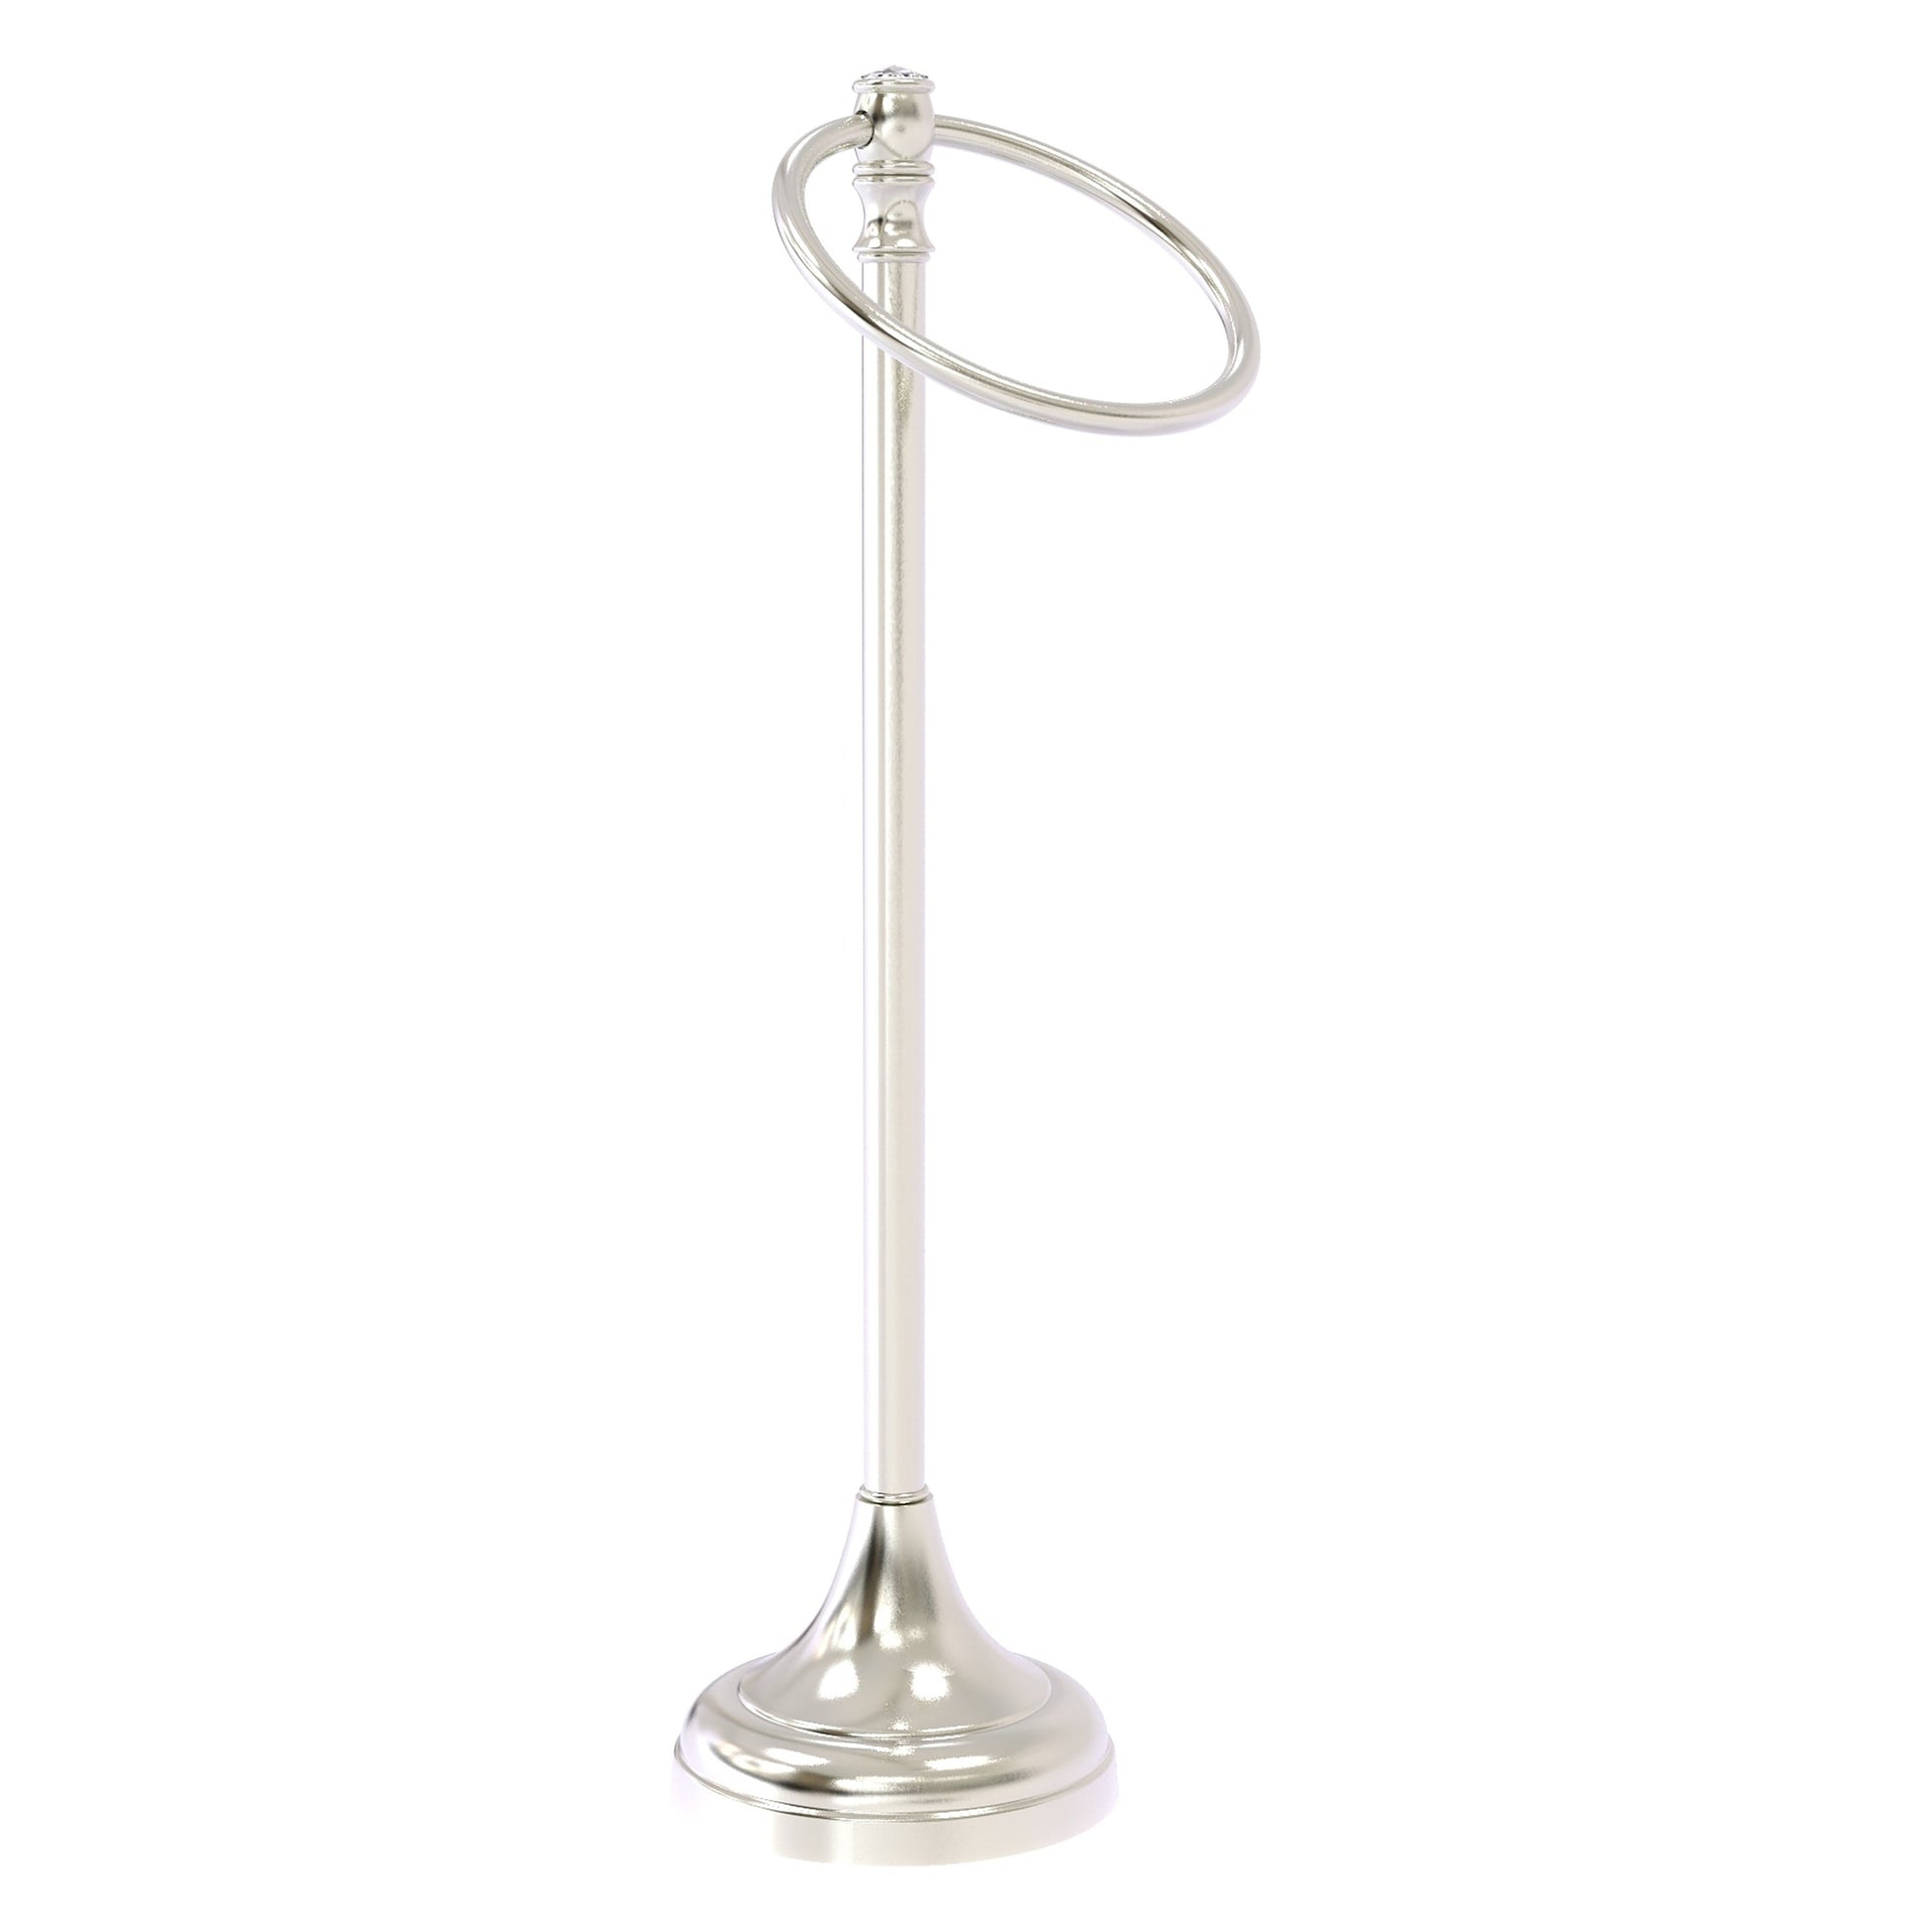 Allied Brass Carolina Crystal 5.5" x 7.5" Satin Nickel Solid Brass Guest Towel Ring Stand